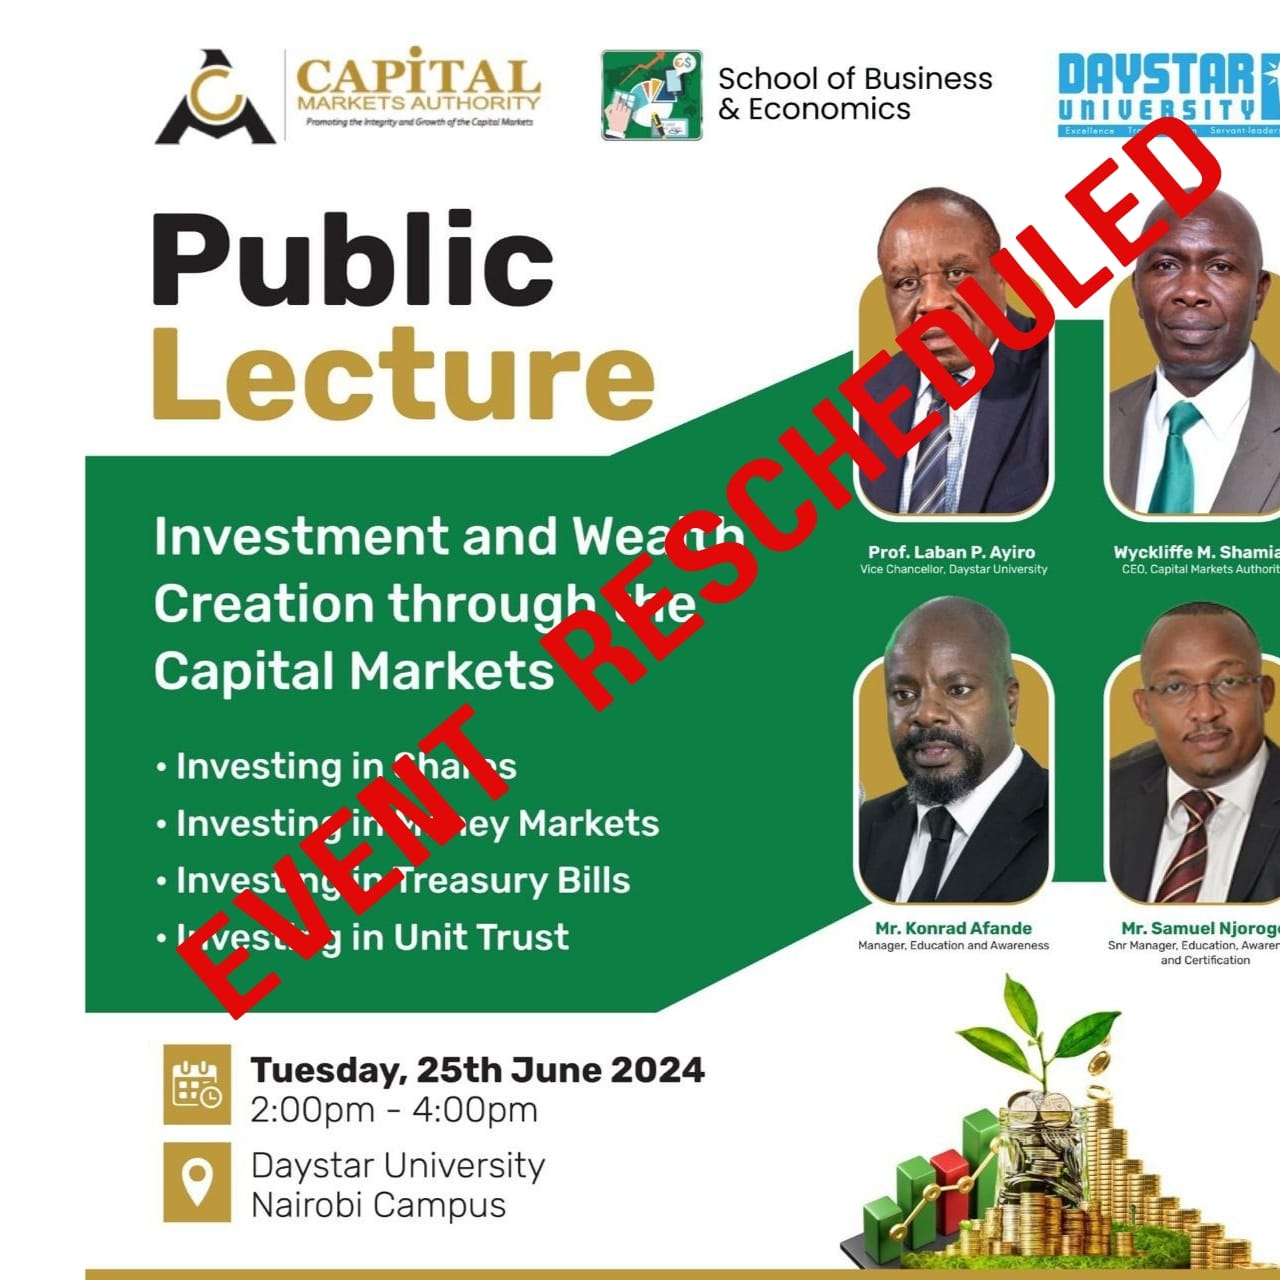 Daystar University School of Business &amp; Economics and Capital Markets Authority to hold a Public Lecture (Postponed)